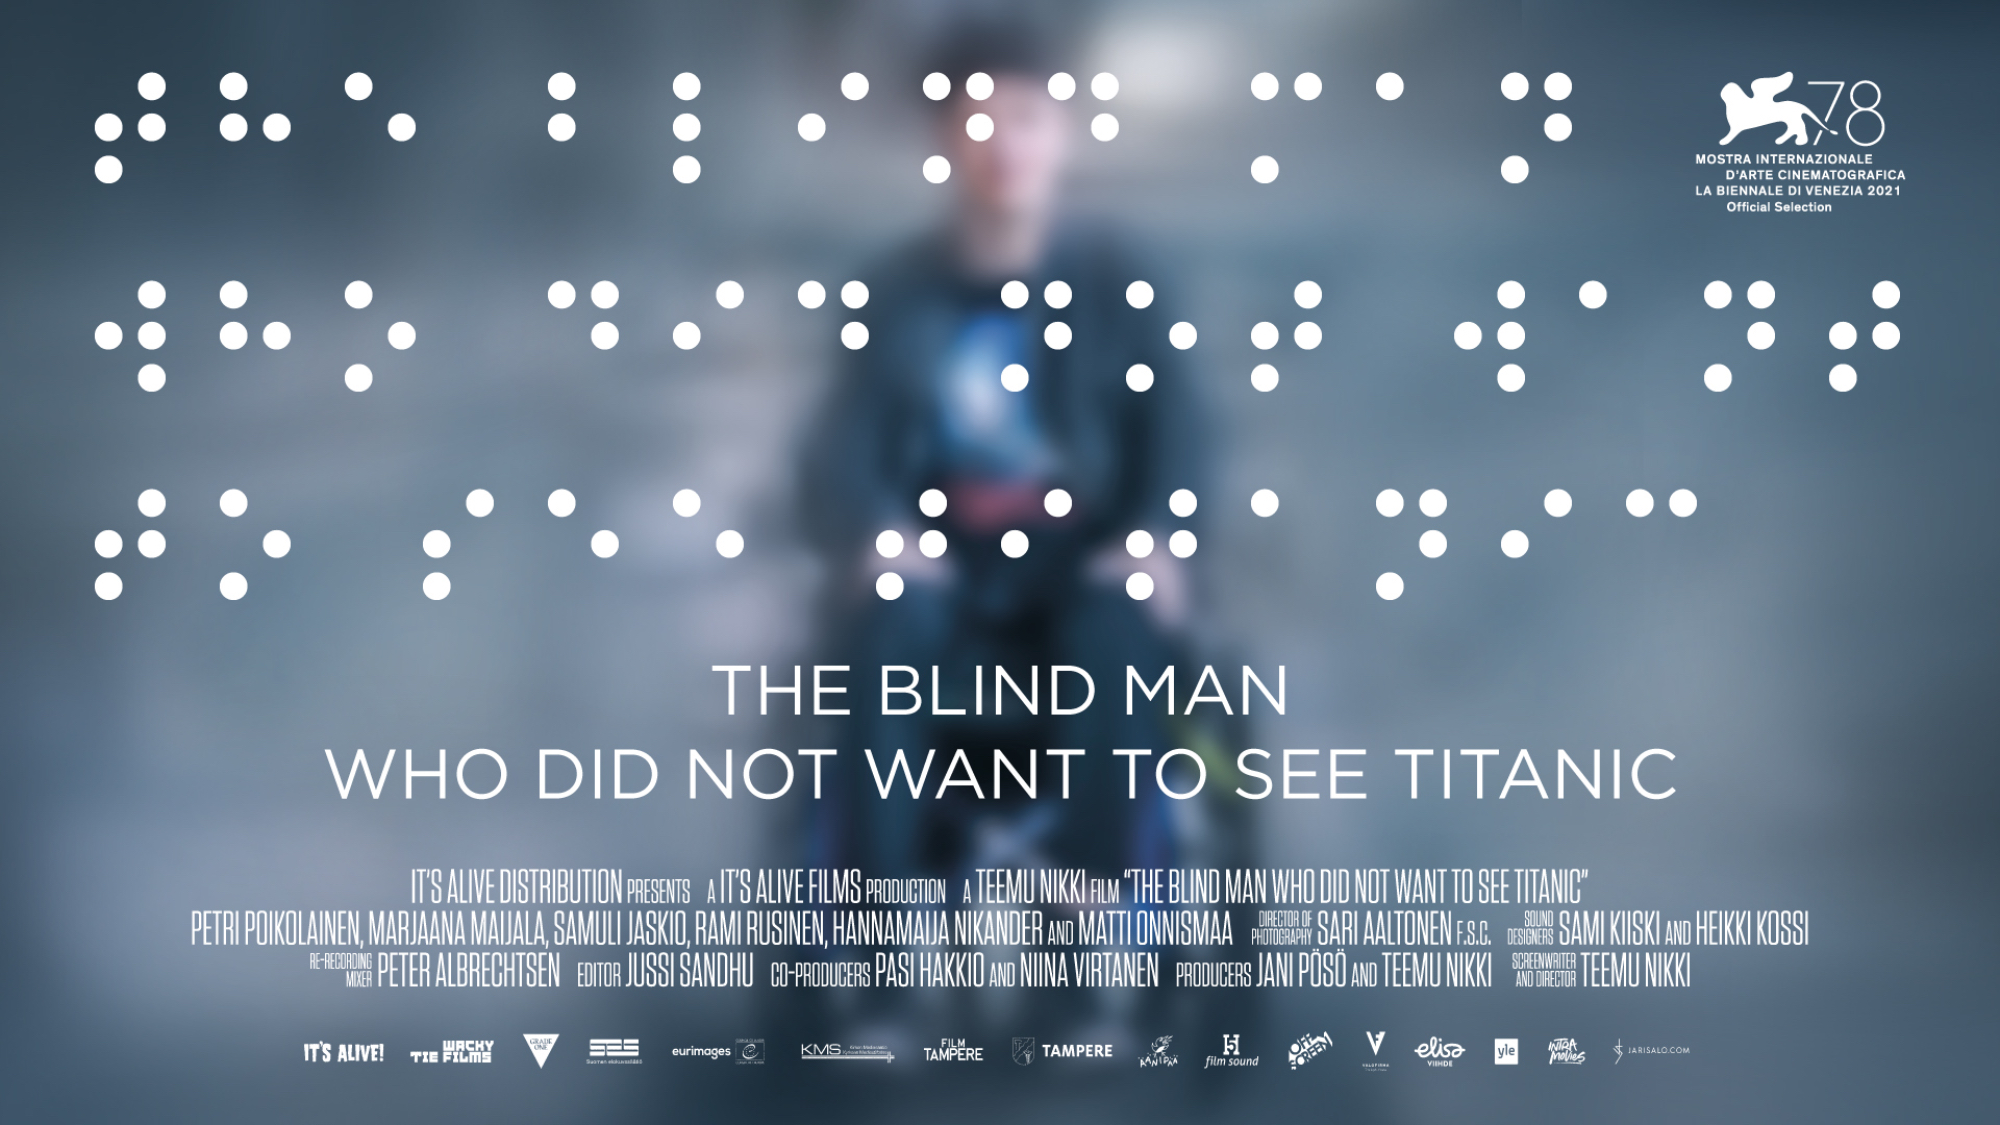 The Blind Man That Did Not Want To See The Titanic: Full Review (SXSW)